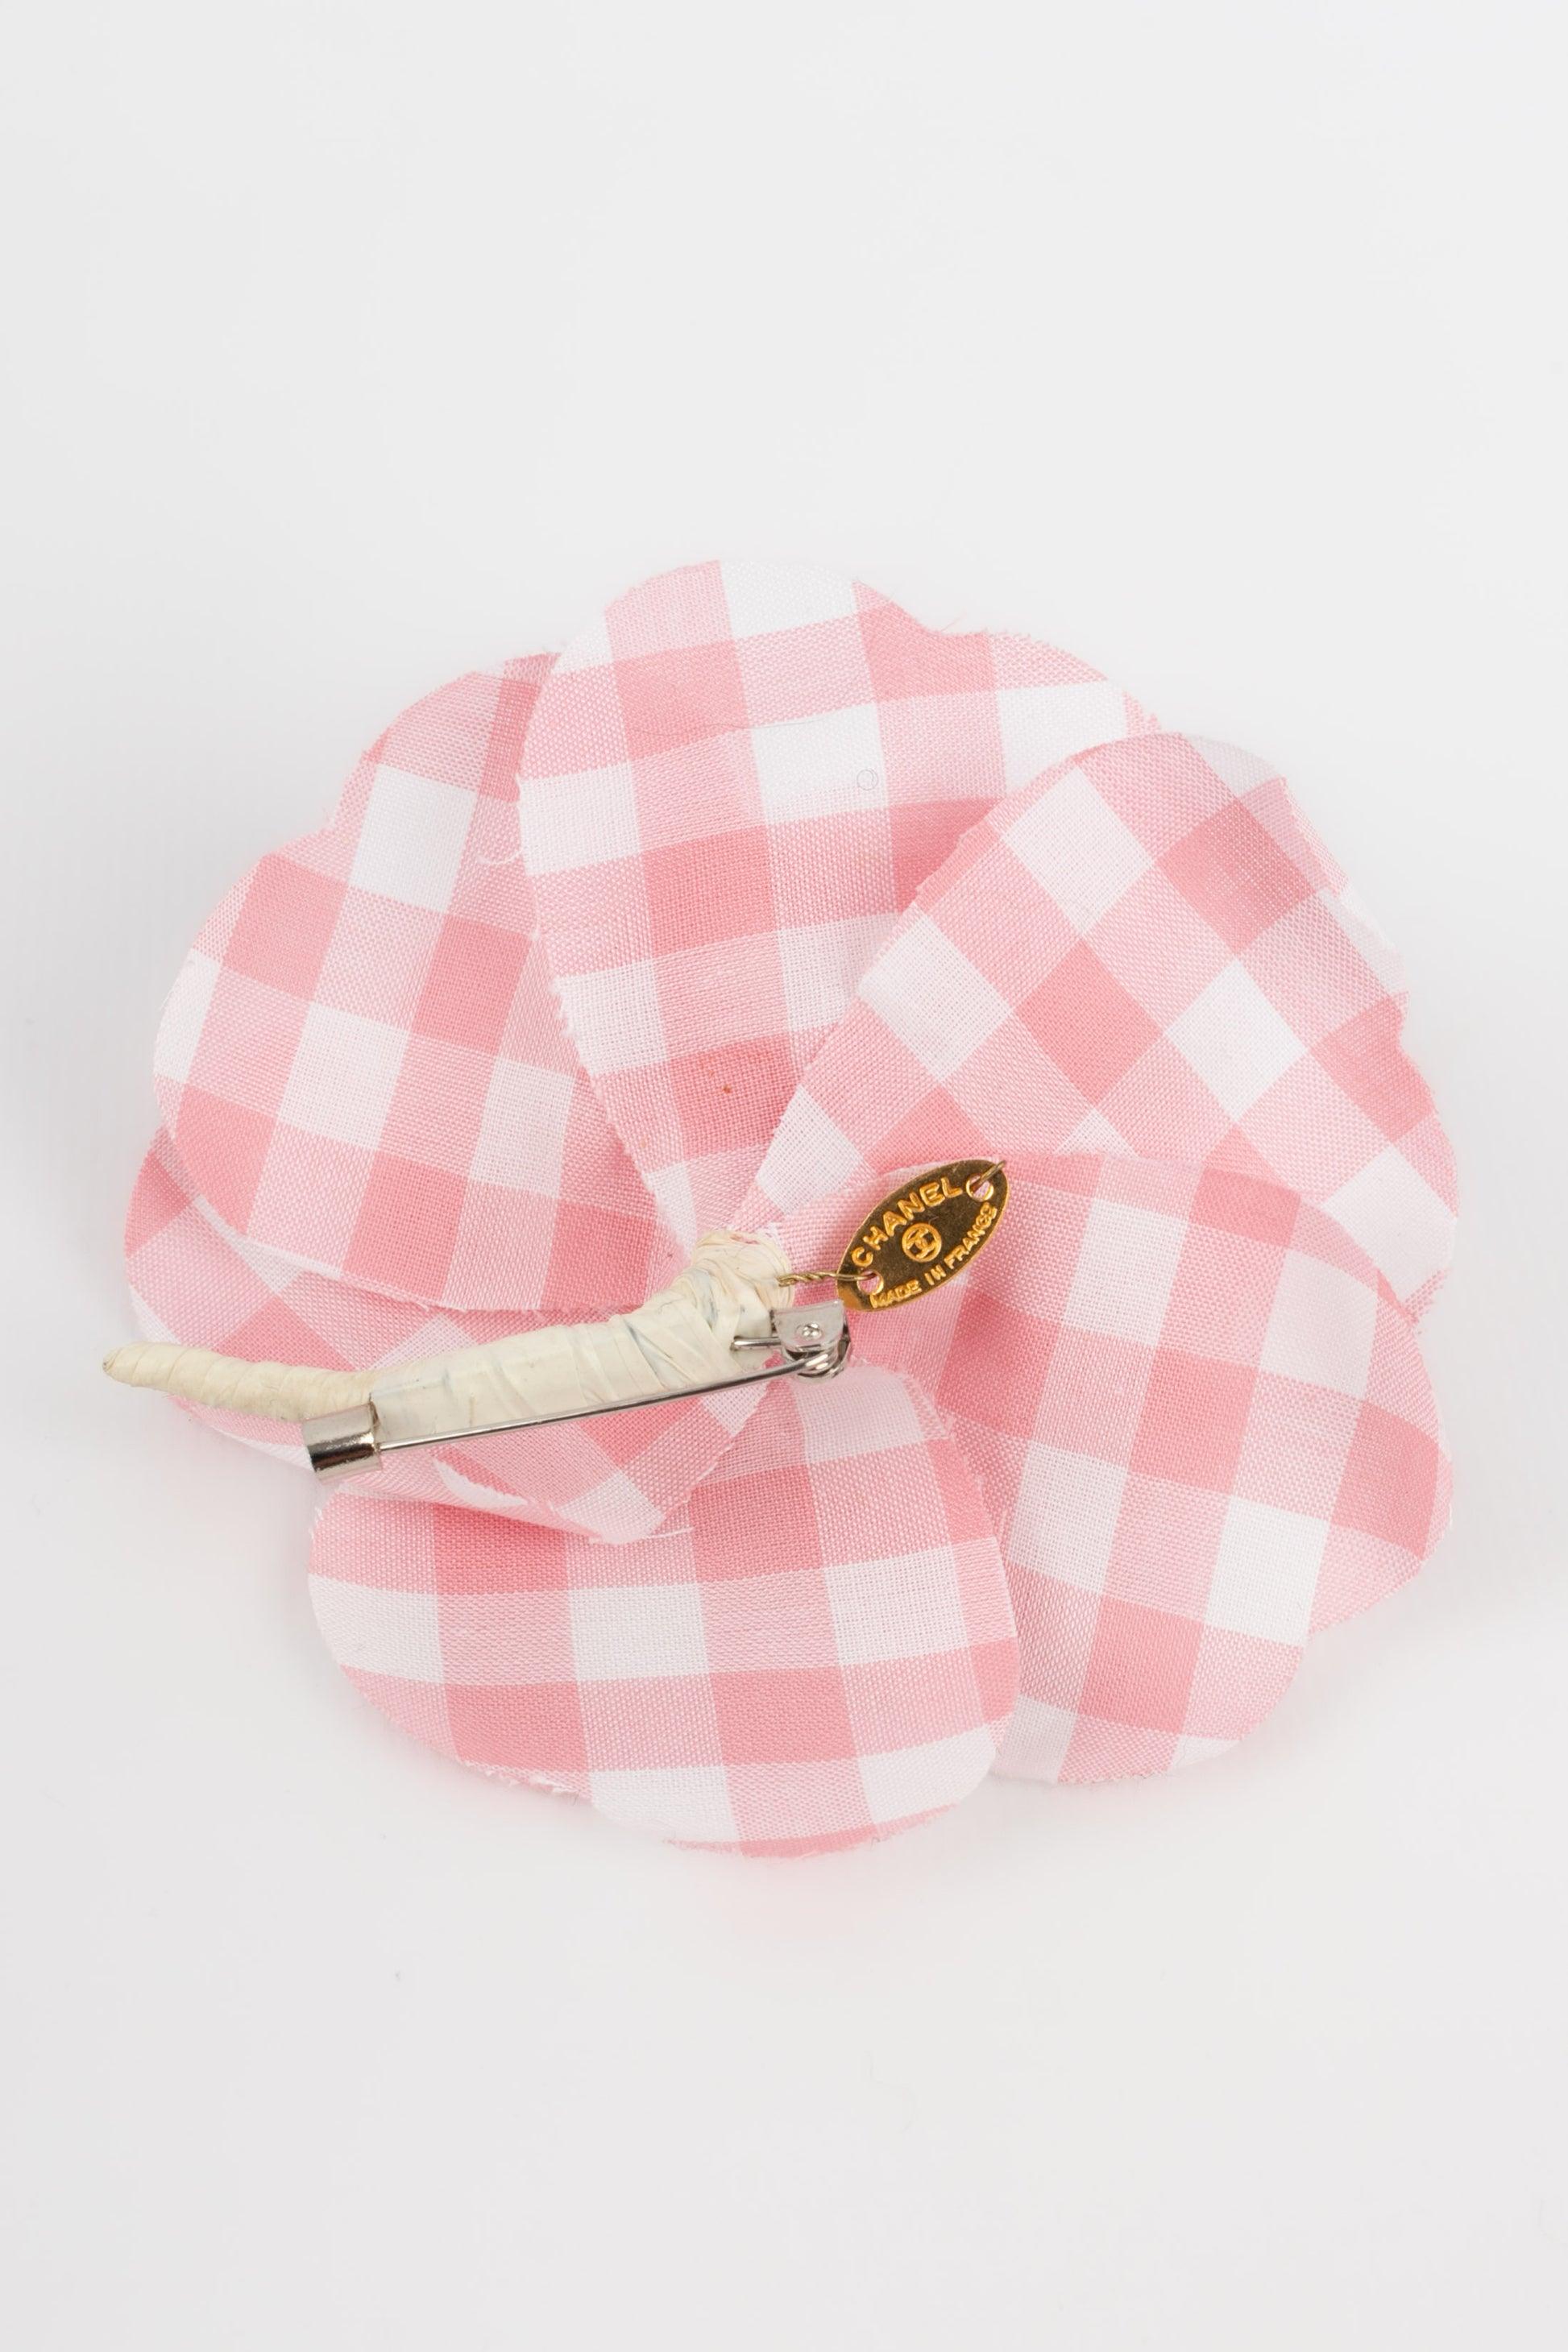 Chanel Brooch Camellia Made of Pink and White Gingham Fabric, 1990s In Excellent Condition For Sale In SAINT-OUEN-SUR-SEINE, FR